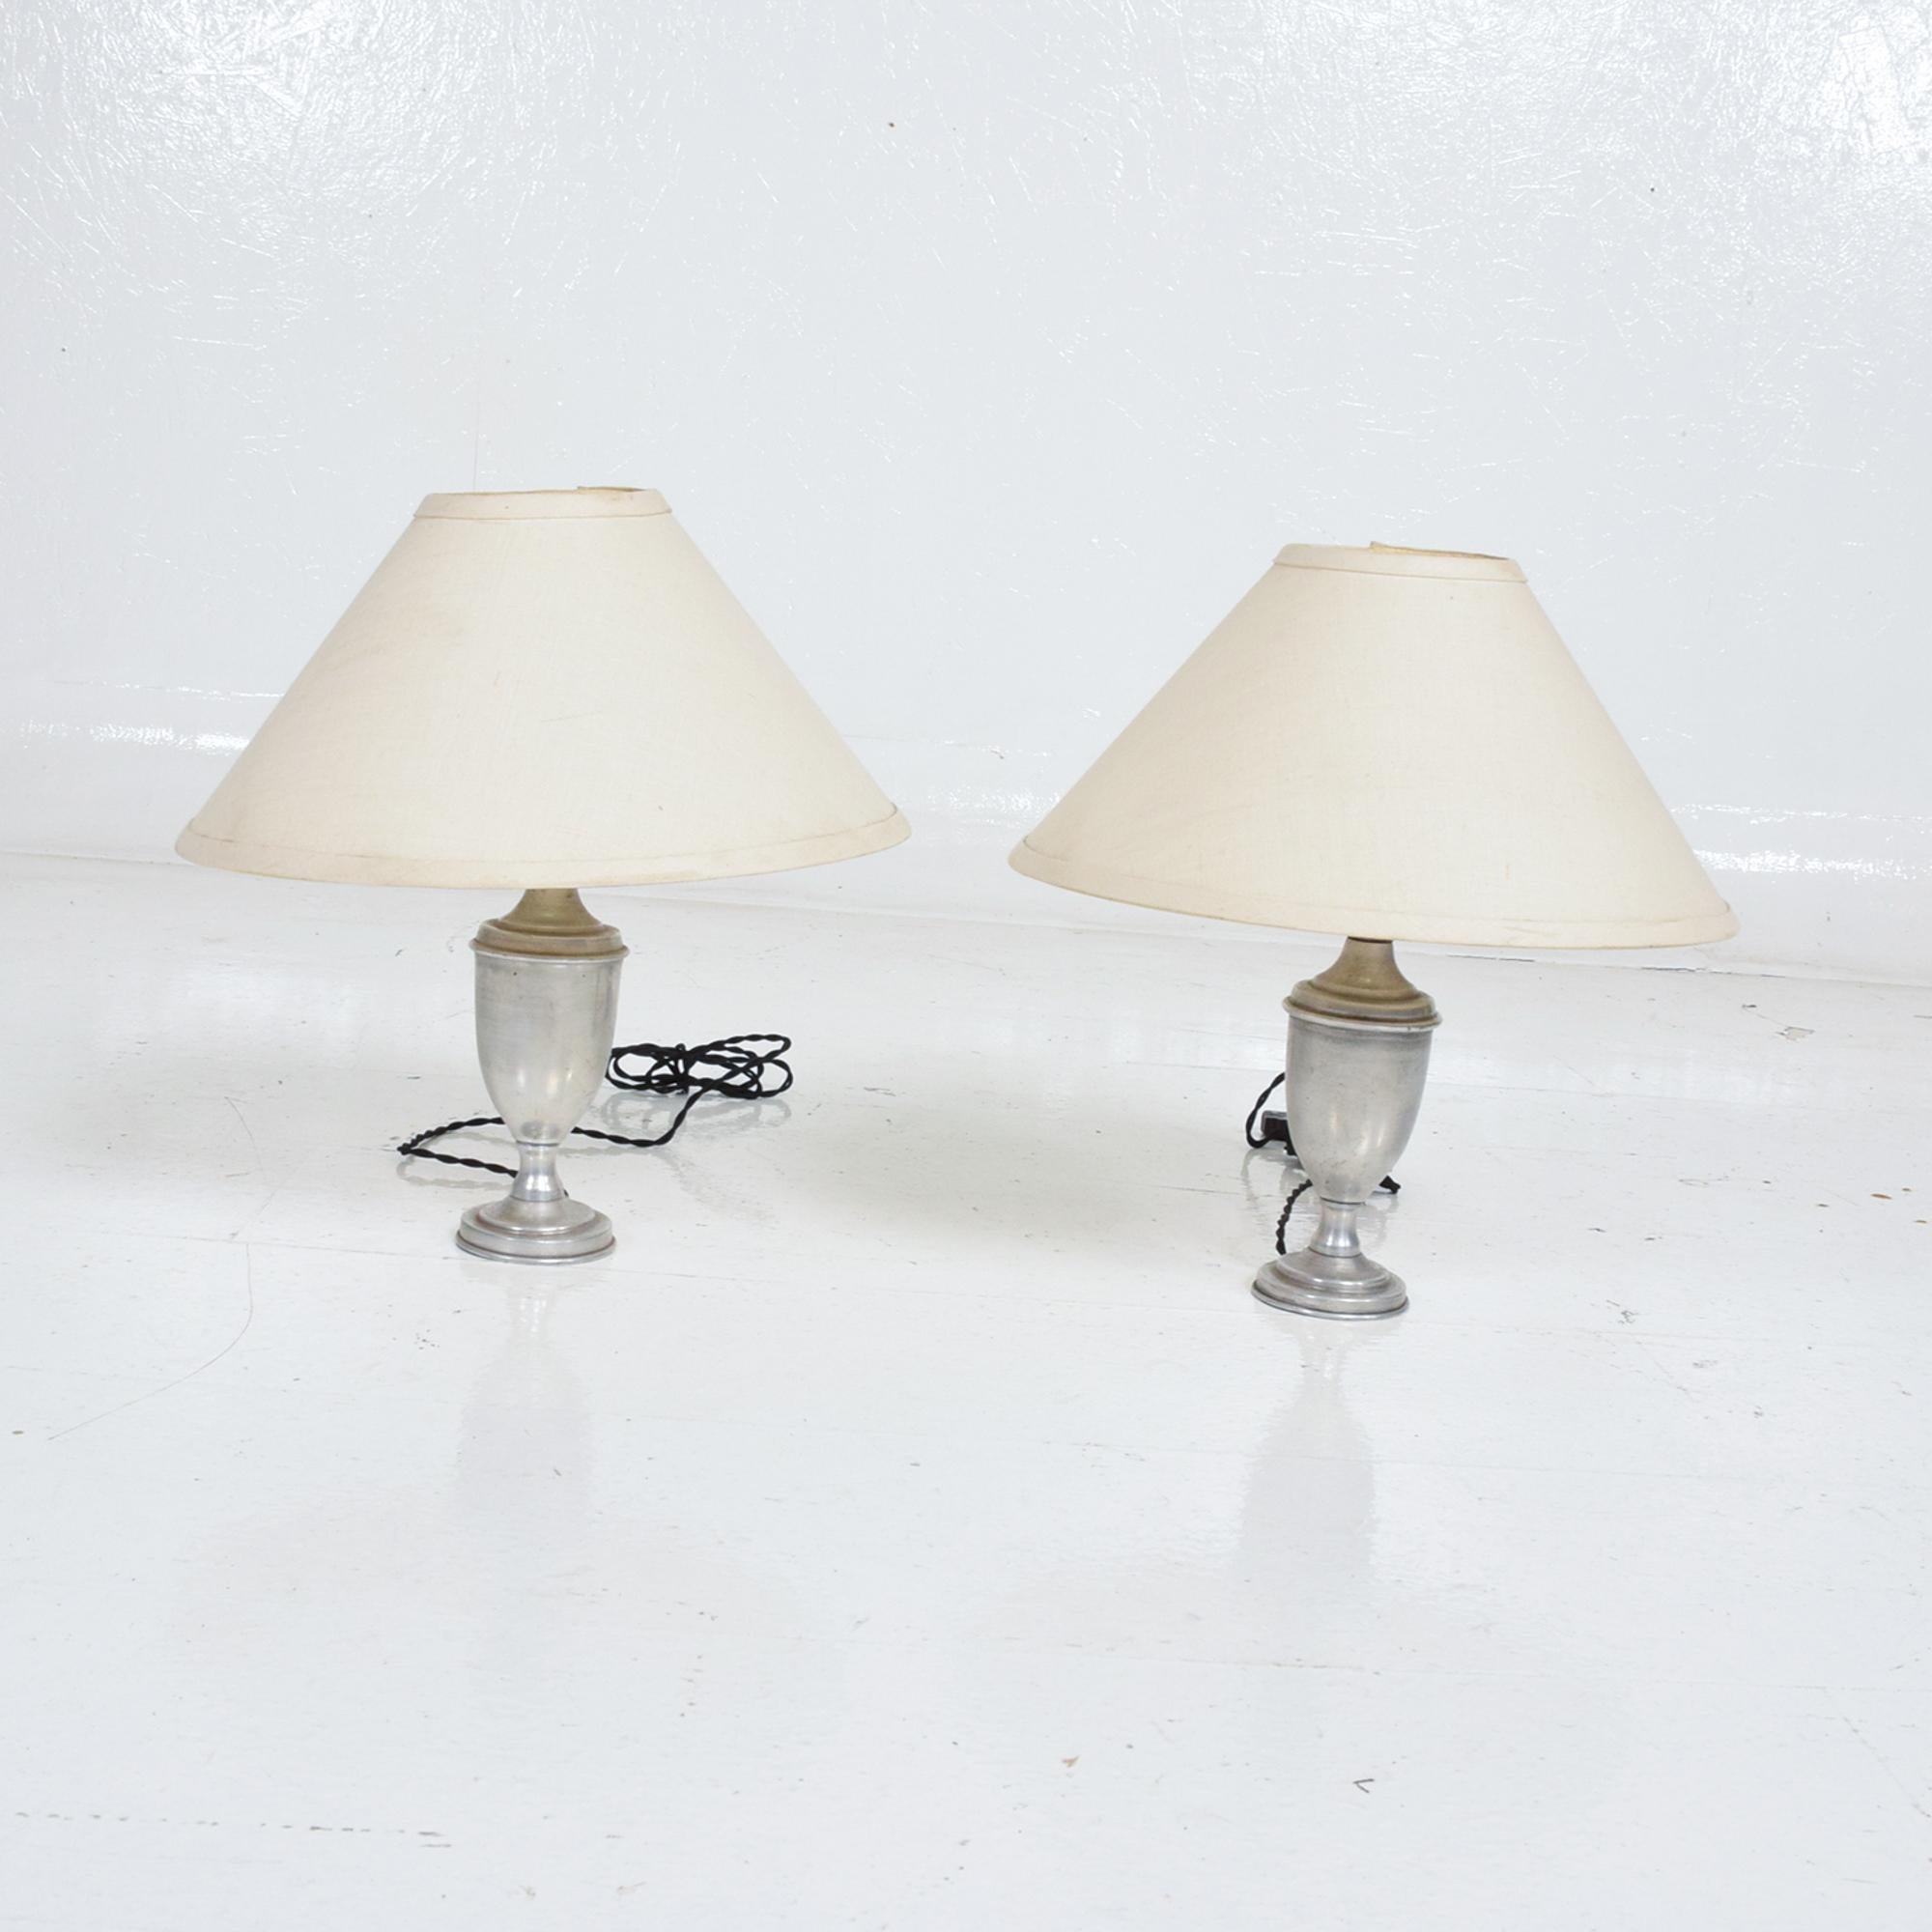 Table Lamps
Hollywood Regency Pair of Petite Table Desk Lamps in Aluminum.
Dimensions: 9.5 x 2.5 in diameter.
Made in the USA circa 1960s. Unmarked.
Constructed in aluminum. No lampshades are included.
Original Unrestored Vintage Condition. Rewired.